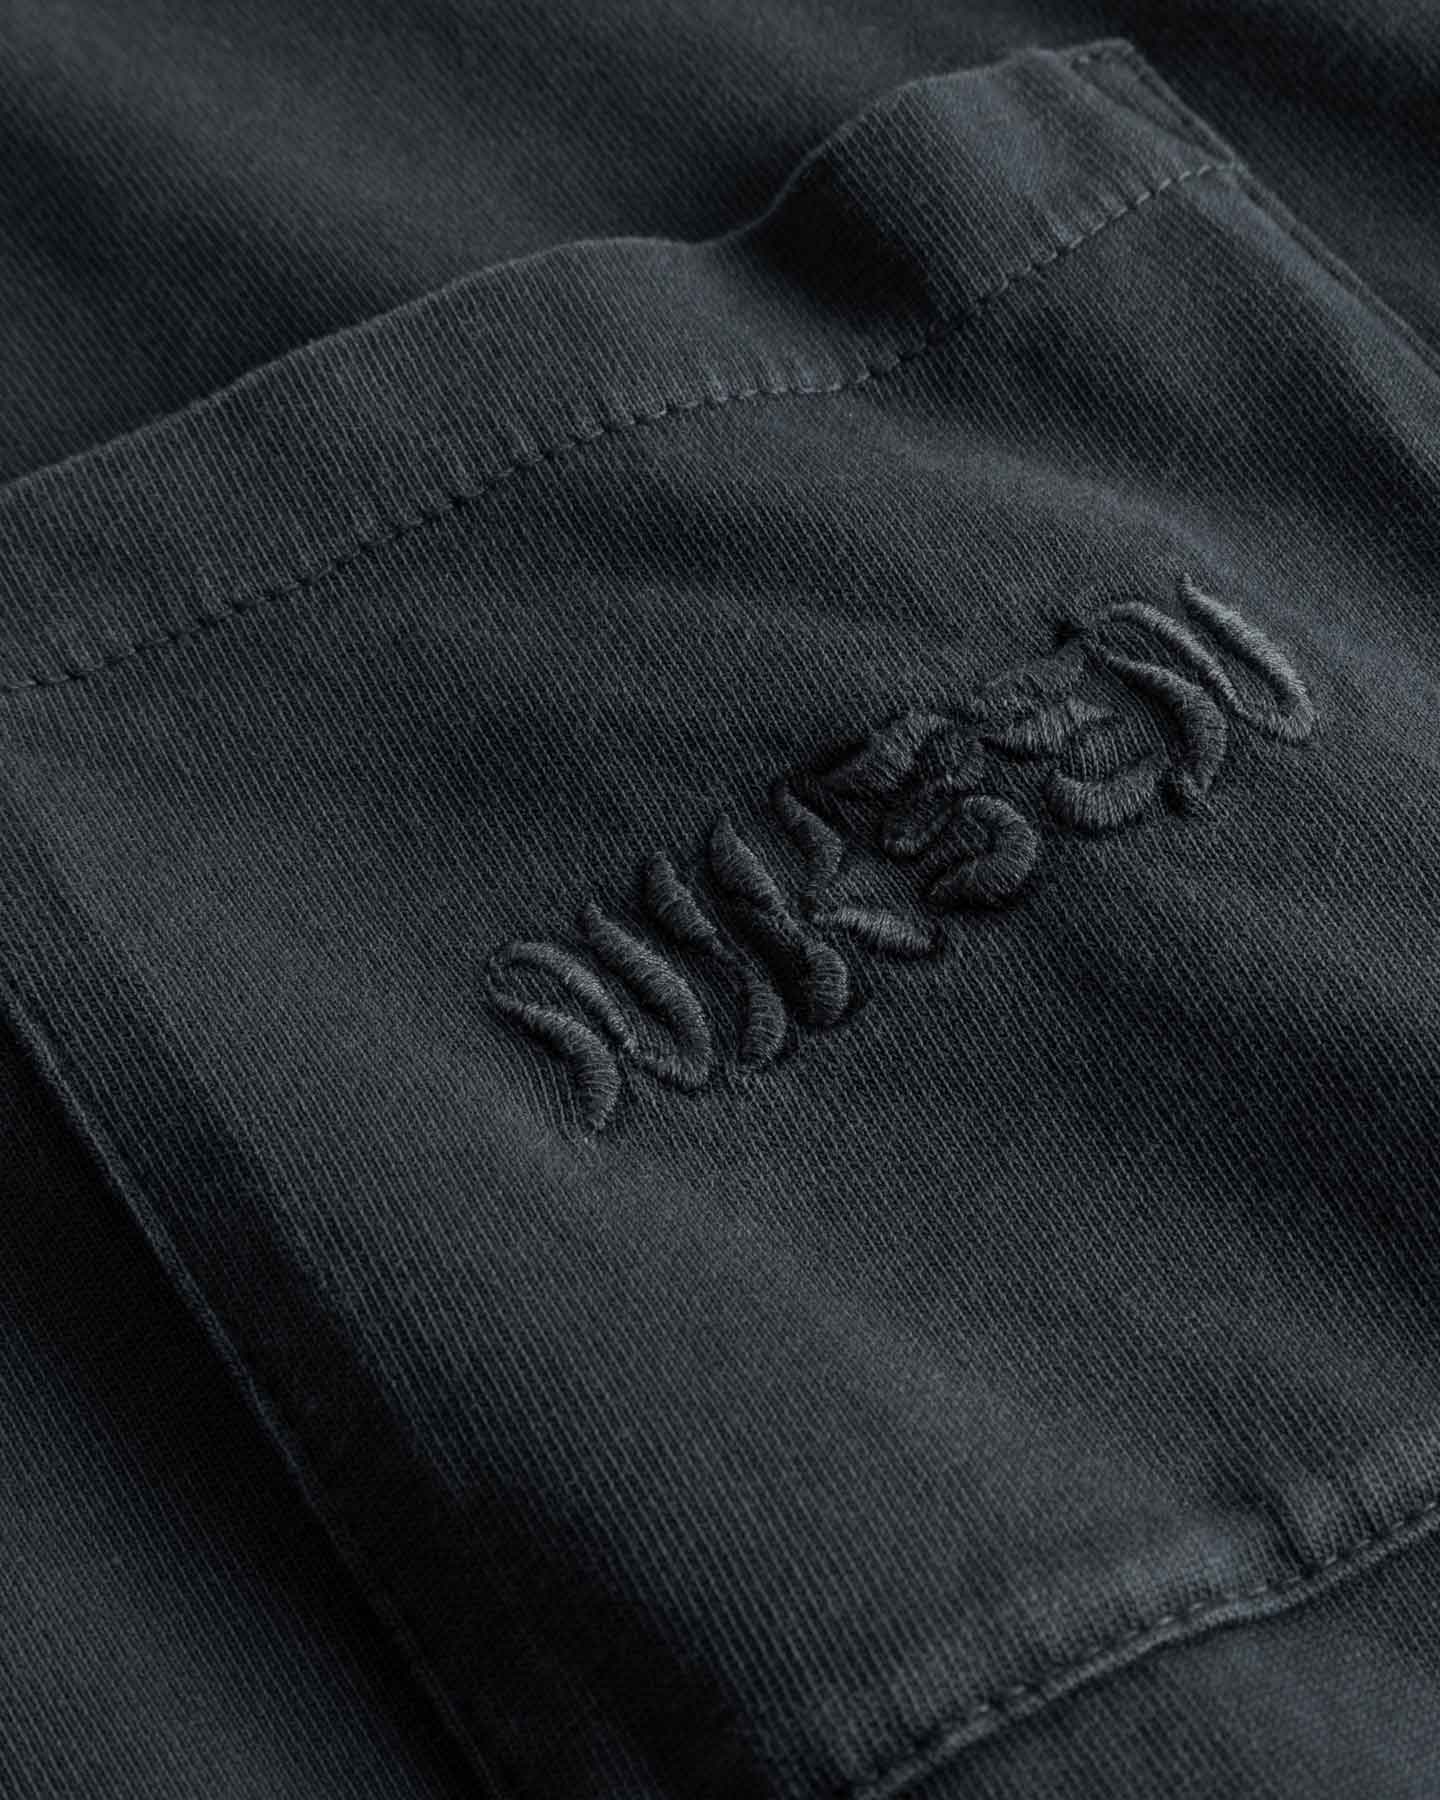 Close-up of chest pocket with tone in tone embroidered "nikben" logo on washed black T-shirt